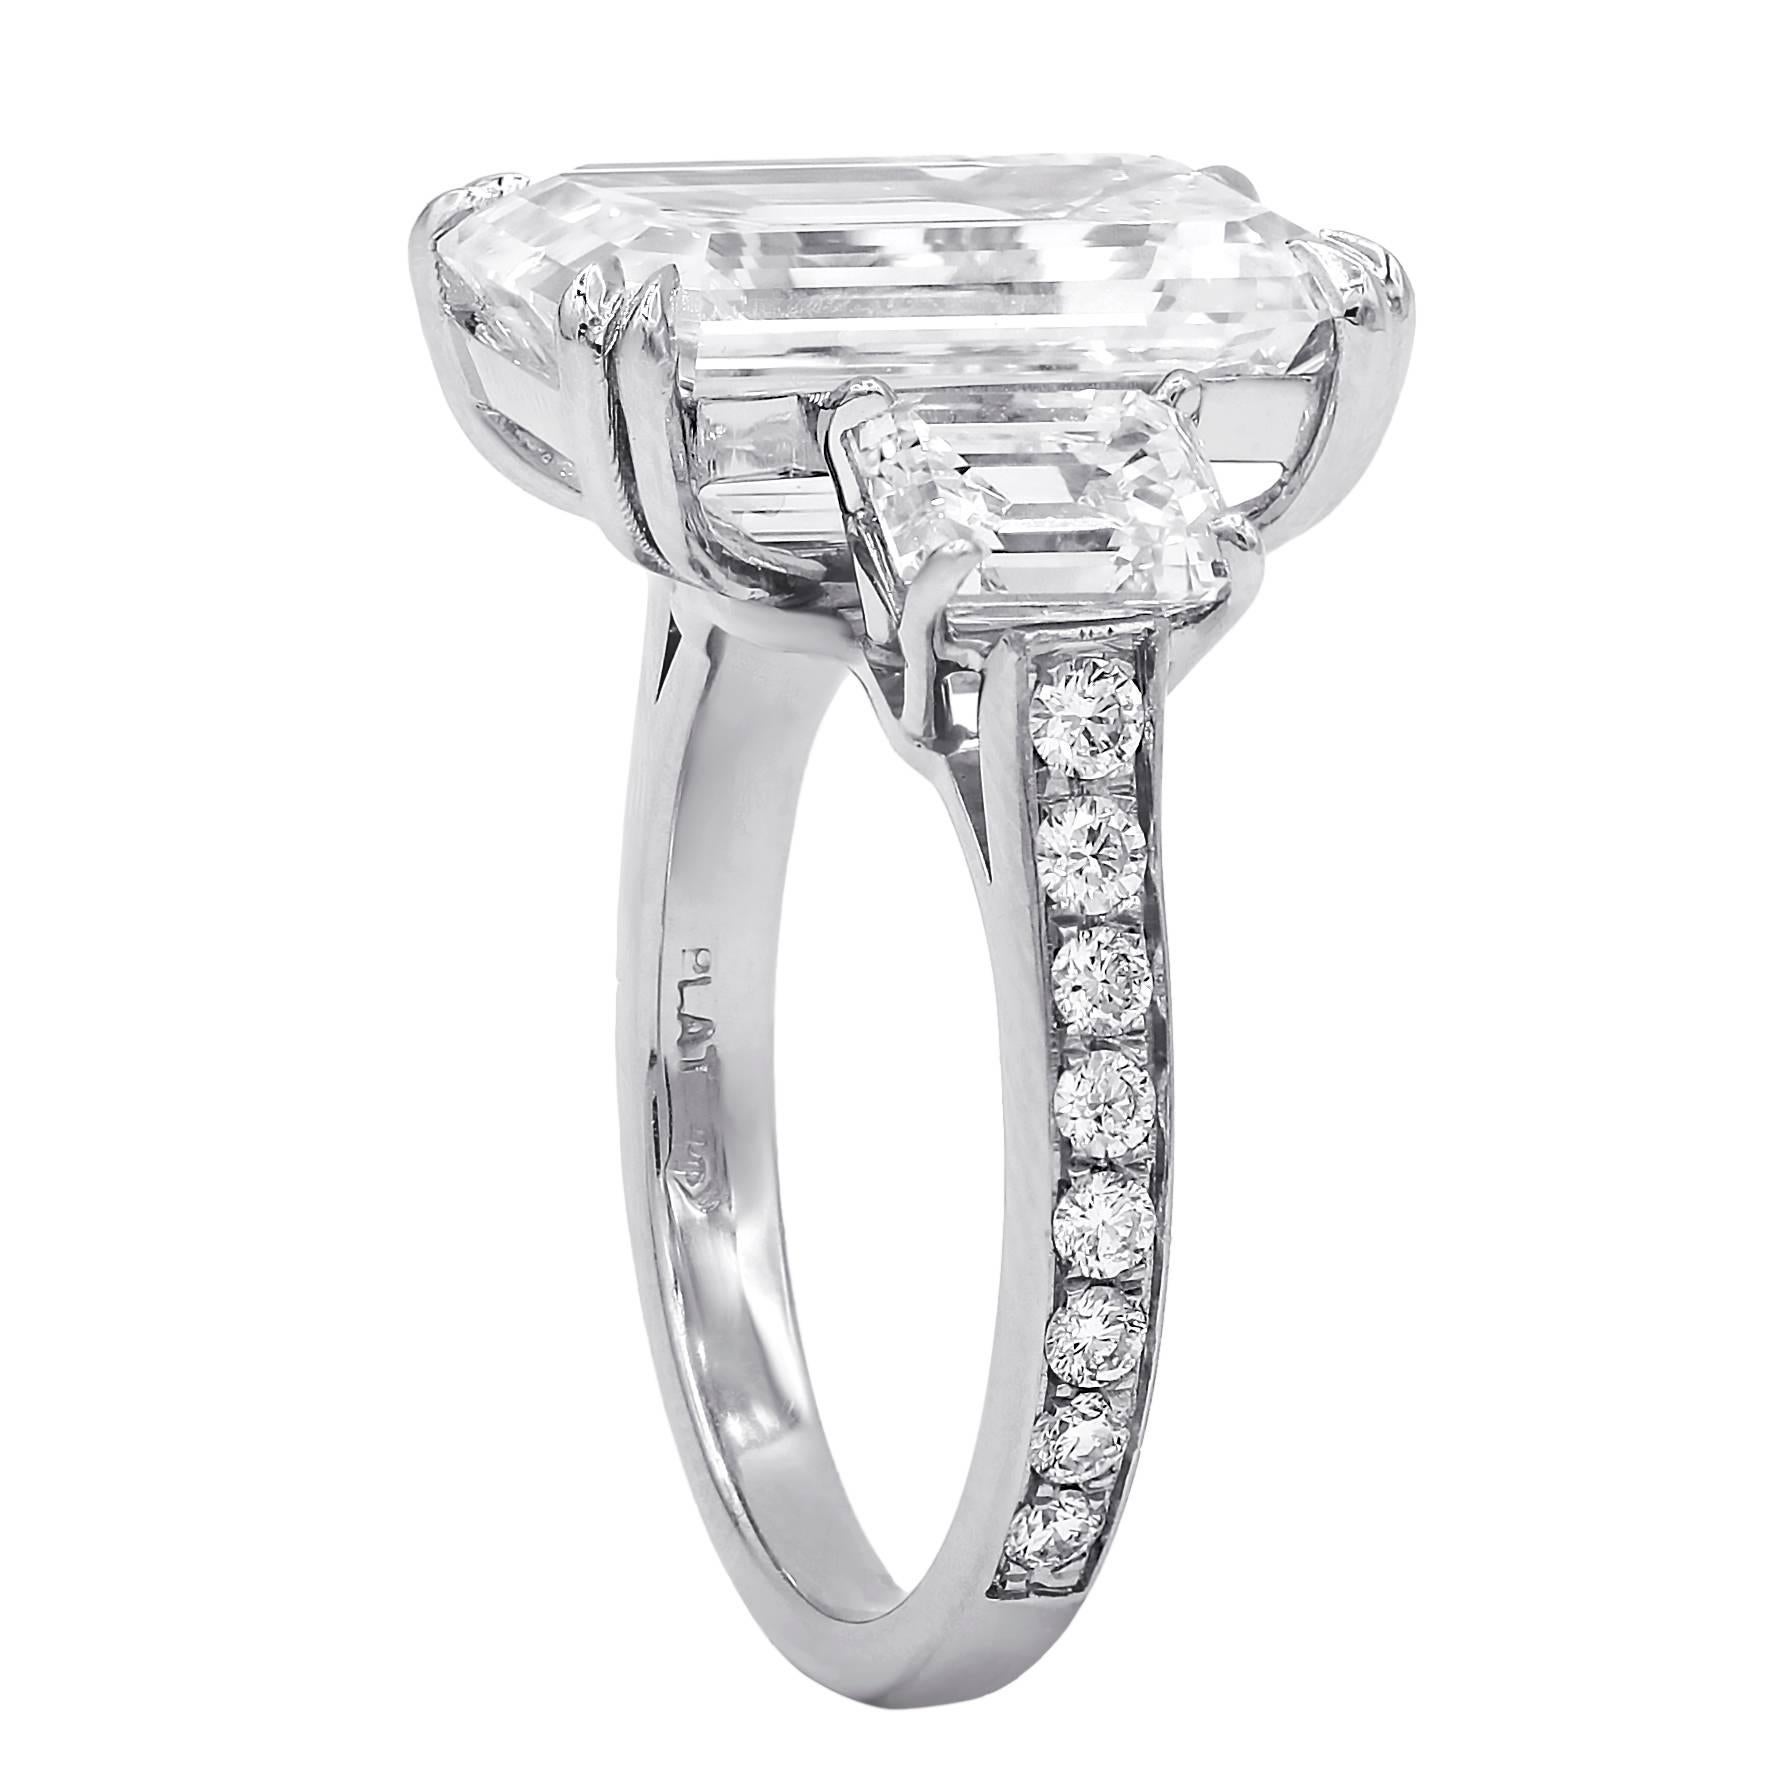 Spectacular Emerald Cut Diamond Ring. The center diamond is 9.38 Carats, The Color grade is I, the Clarity is VVS2. The center stone measures 15.63x10.19x6.32 mm. Accompanied with GIA Certificate.
The center diamond surrounded by Two Emerald cut